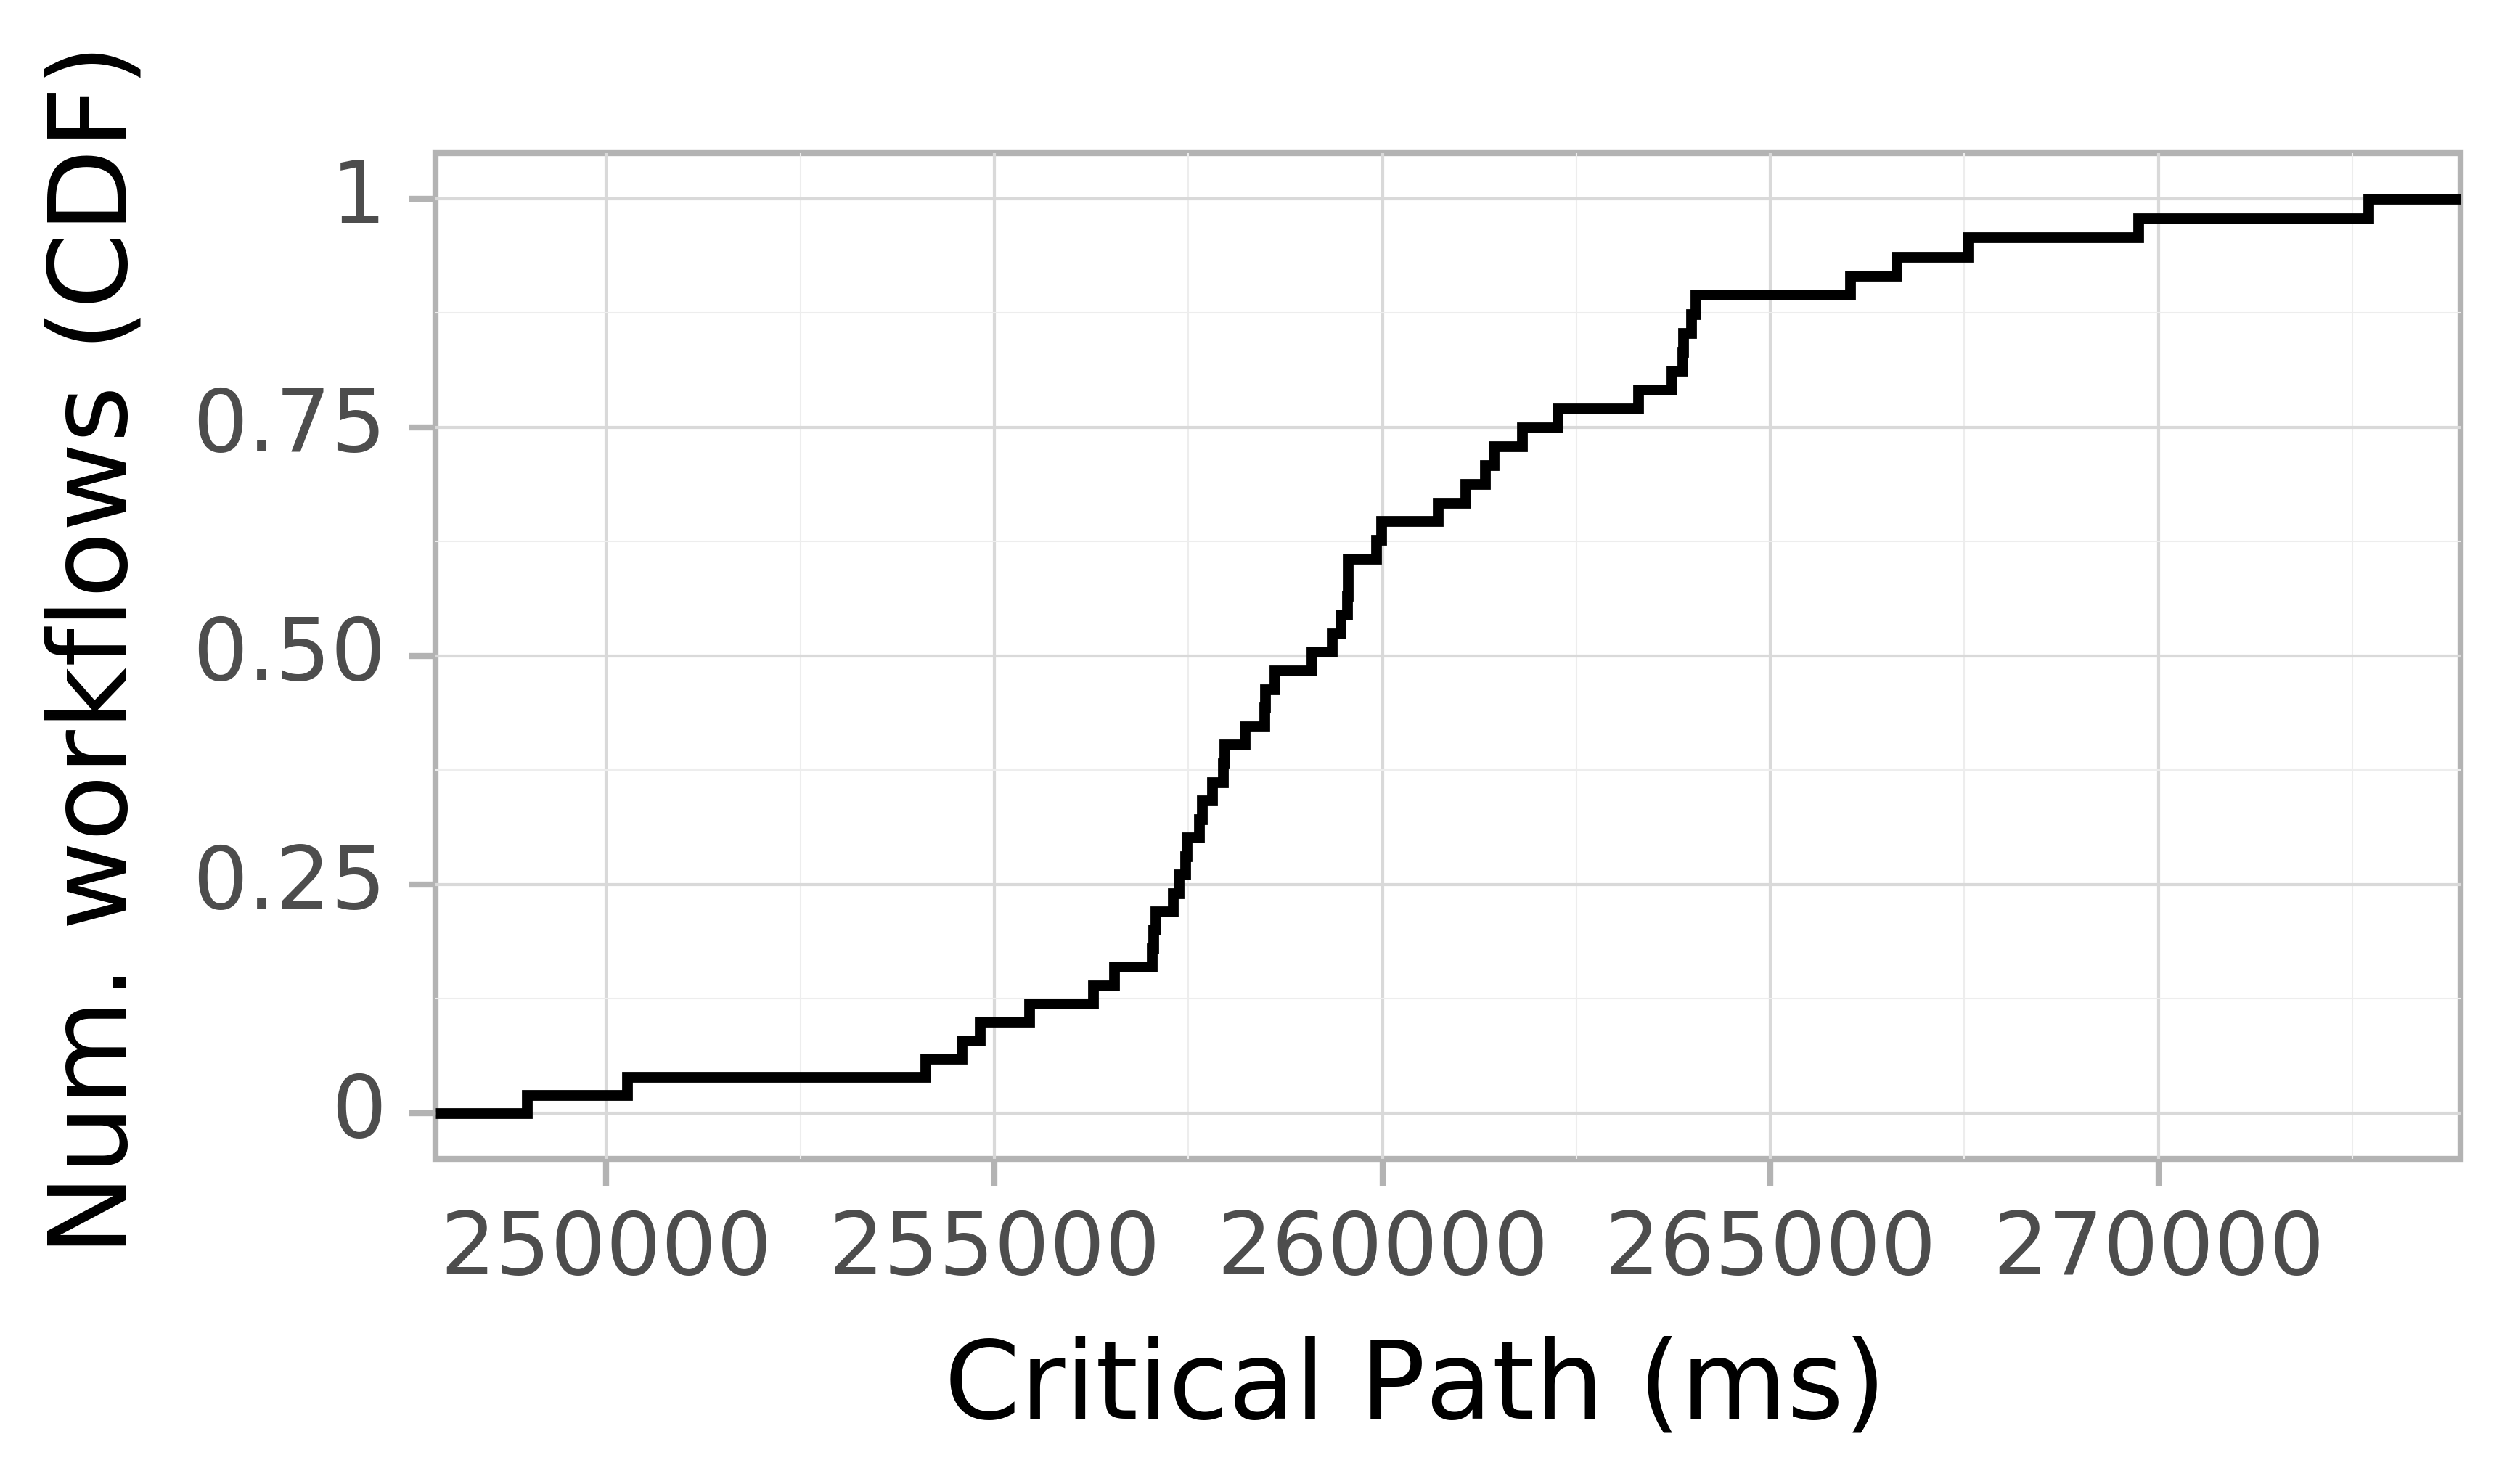 Job runtime CDF graph for the askalon-new_ee53 trace.